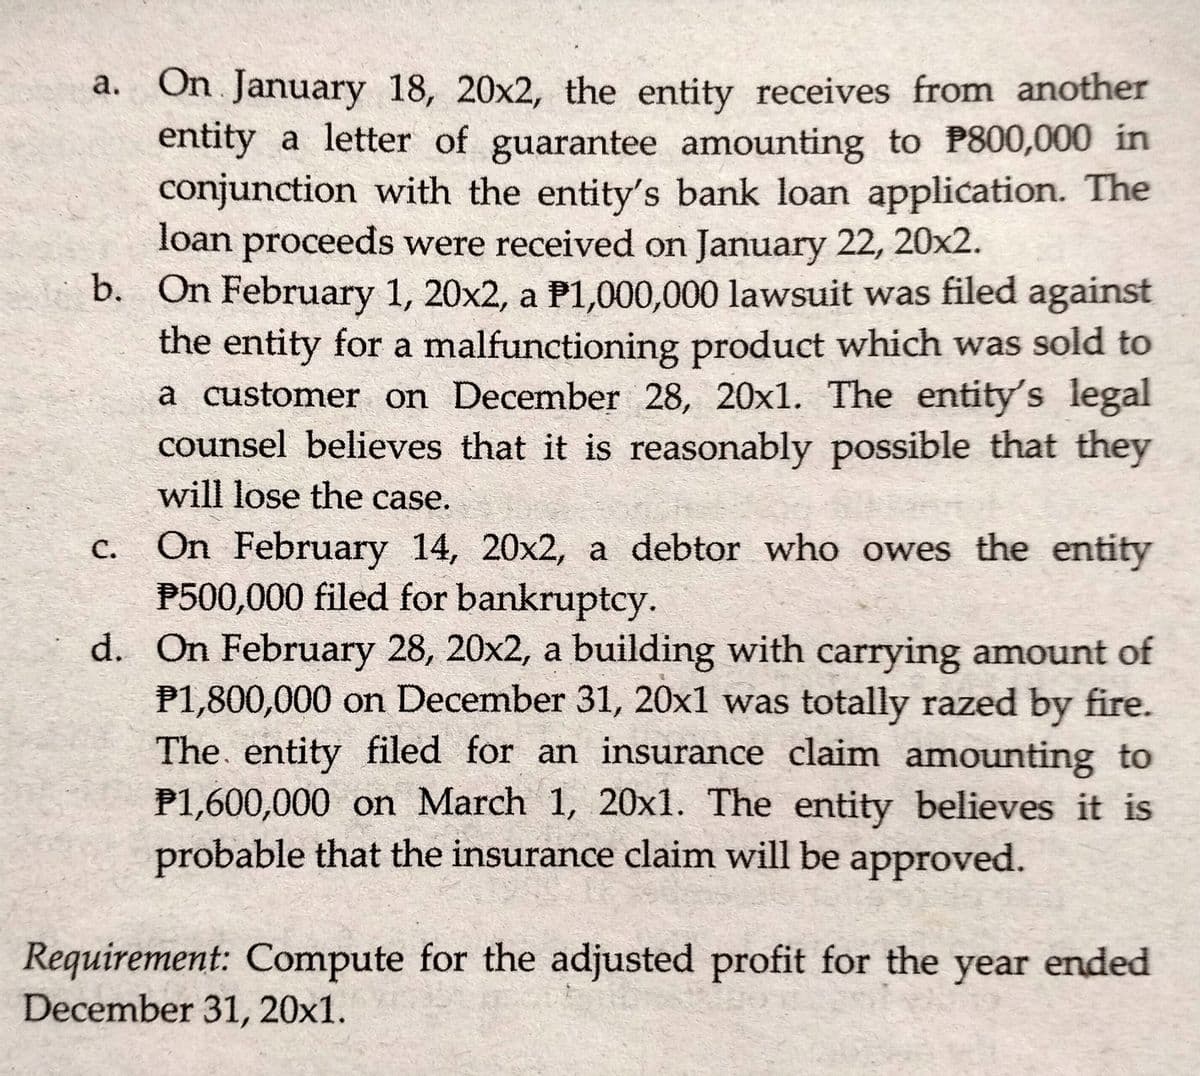 a. On January 18, 20x2, the entity receives from another
entity a letter of guarantee amounting to P800,000 in
conjunction with the entity's bank loan application. The
loan proceeds were received on January 22, 20x2.
b. On February 1, 20x2, a P1,000,000 lawsuit was filed against
the entity for a malfunctioning product which was sold to
a customer on December 28, 20x1. The entity's legal
counsel believes that it is reasonably possible that they
will lose the case.
On February 14, 20x2, a debtor who owes the entity
P500,000 filed for bankruptcy.
d. On February 28, 20x2, a building with carrying amount of
P1,800,000 on December 31, 20x1 was totally razed by fire.
The. entity filed for an insurance claim amounting to
P1,600,000 on March 1, 20x1. The entity believes it is
probable that the insurance claim will be approved.
с.
Requirement: Compute for the adjusted profit for the year ended
December 31, 20x1.
